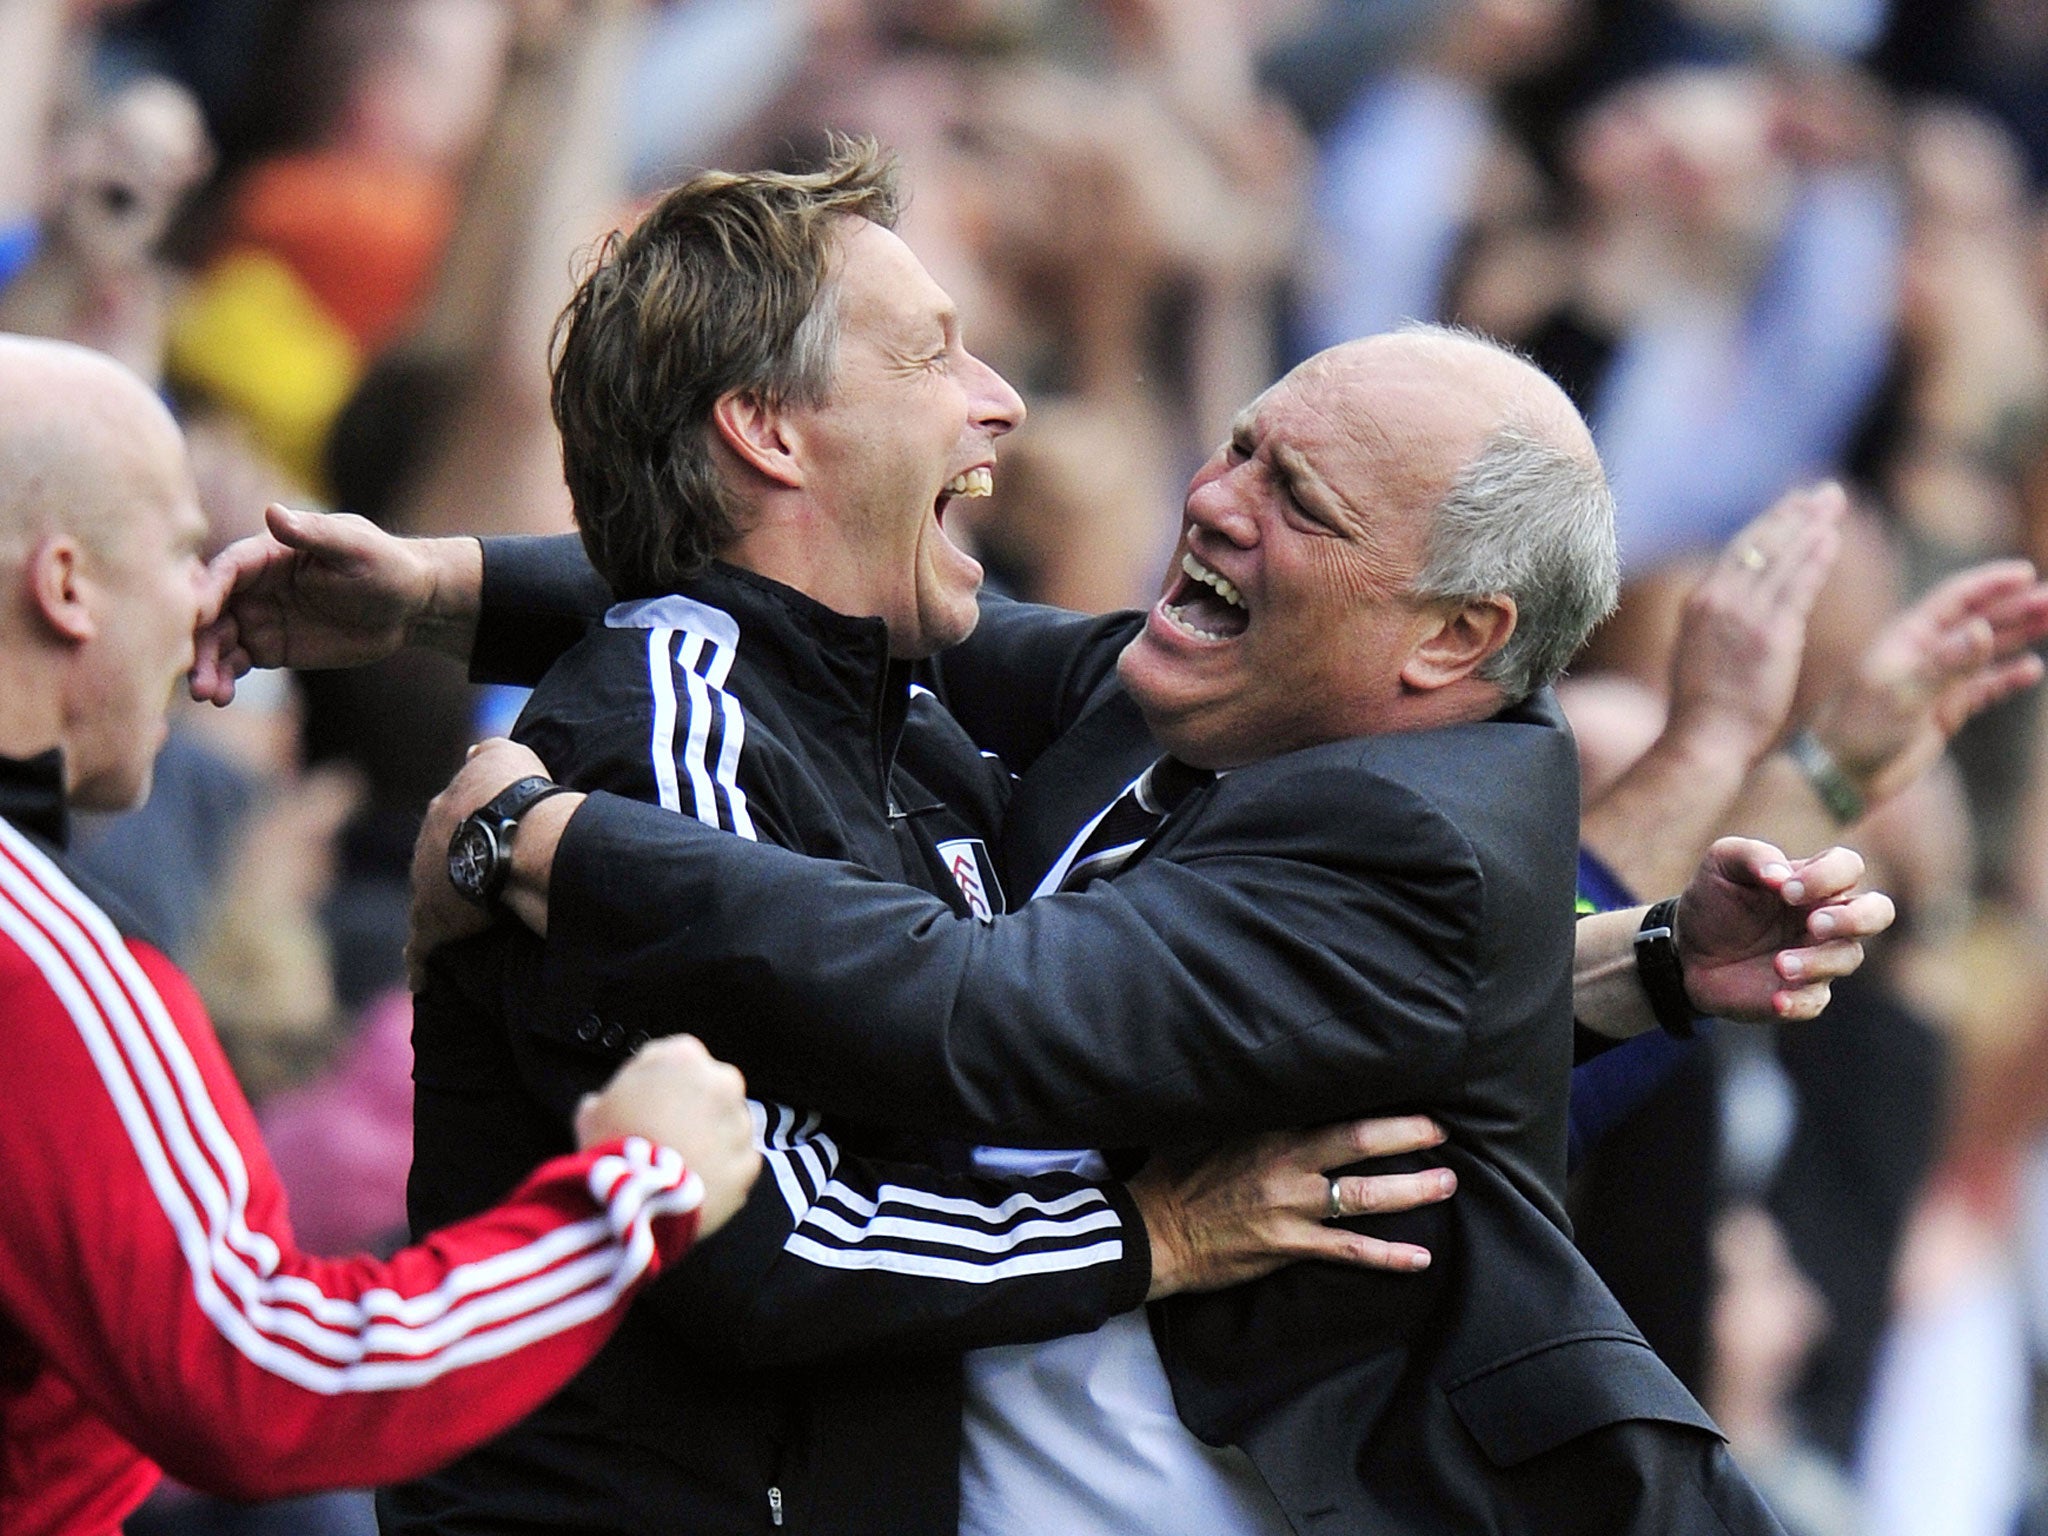 Martin Jol is overjoyed by his side's late goal which sealed the 1-0 win over Stoke earlier this month